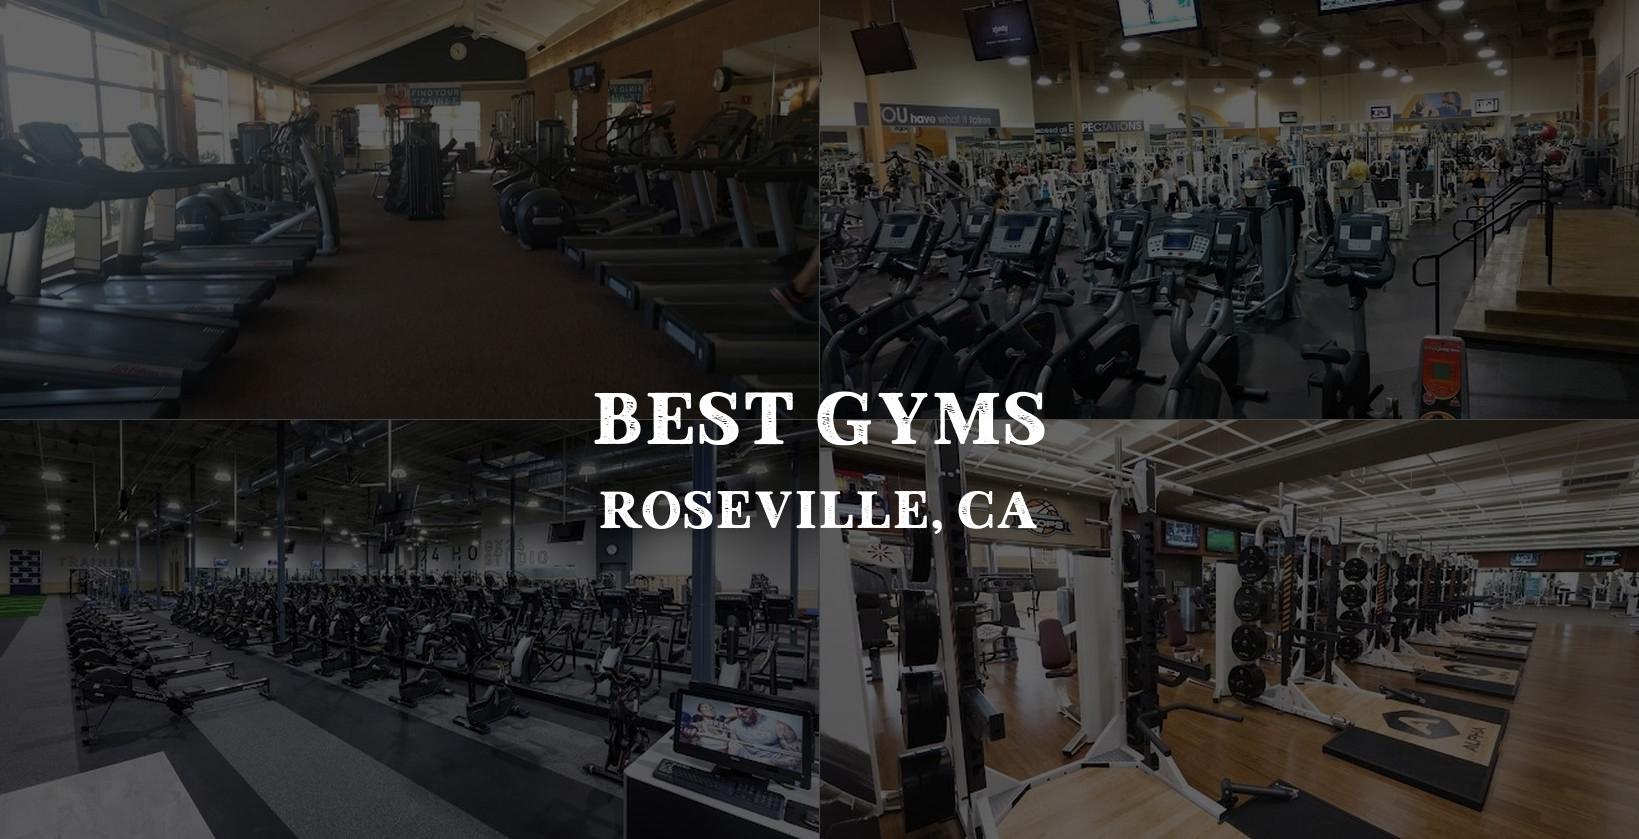 Choosing the right gym in Roseville